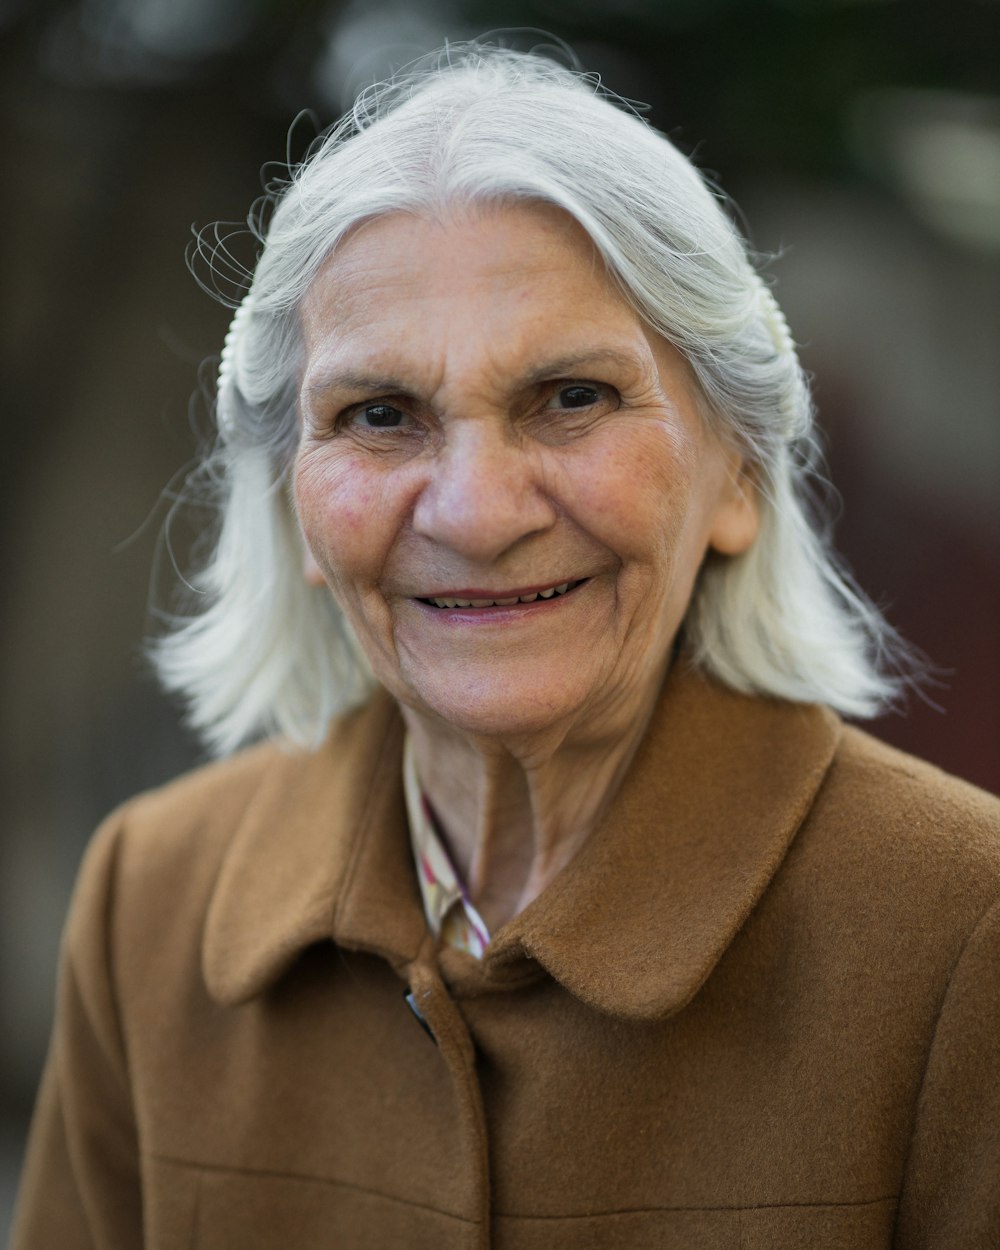 an older woman with white hair and a smile